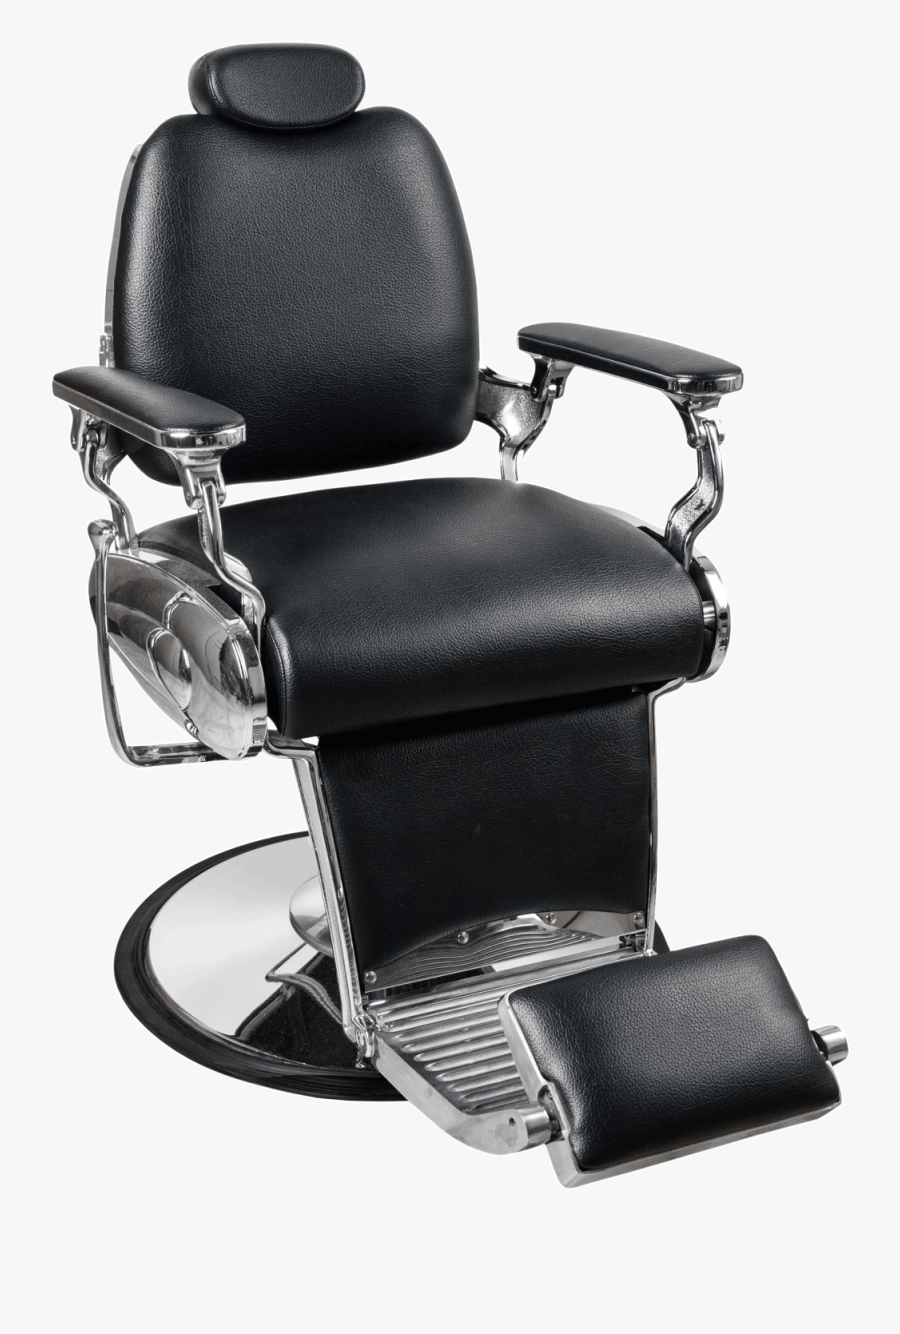 Barber Chair Png - Barber Shop Chair Png, Transparent Clipart